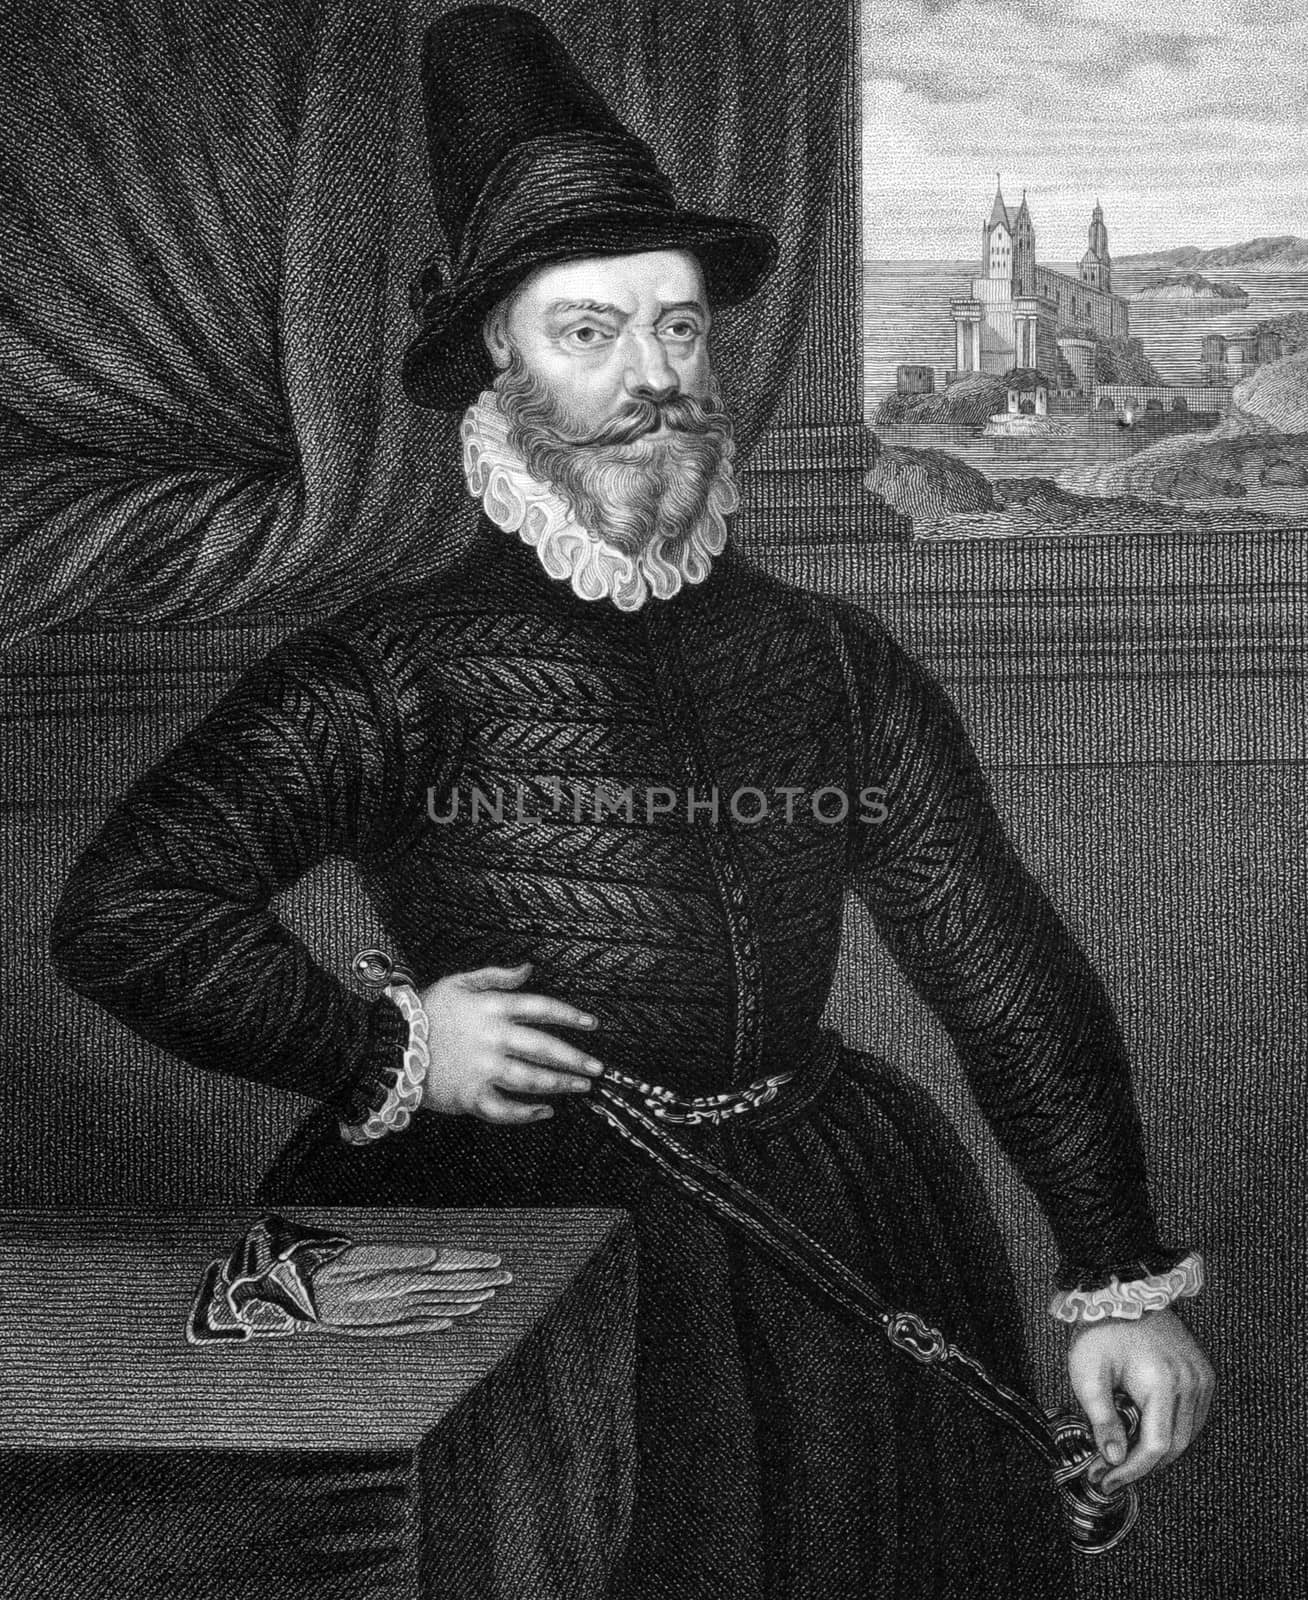 James Douglas, 4th Earl of Morton (1516-1581) on engraving from 1831. The last of the four regents of Scotland during the minority of King James VI. Engraved by S.Freeman and published in ''Portraits of Illustrious Personages of Great Britain'',UK,1831.